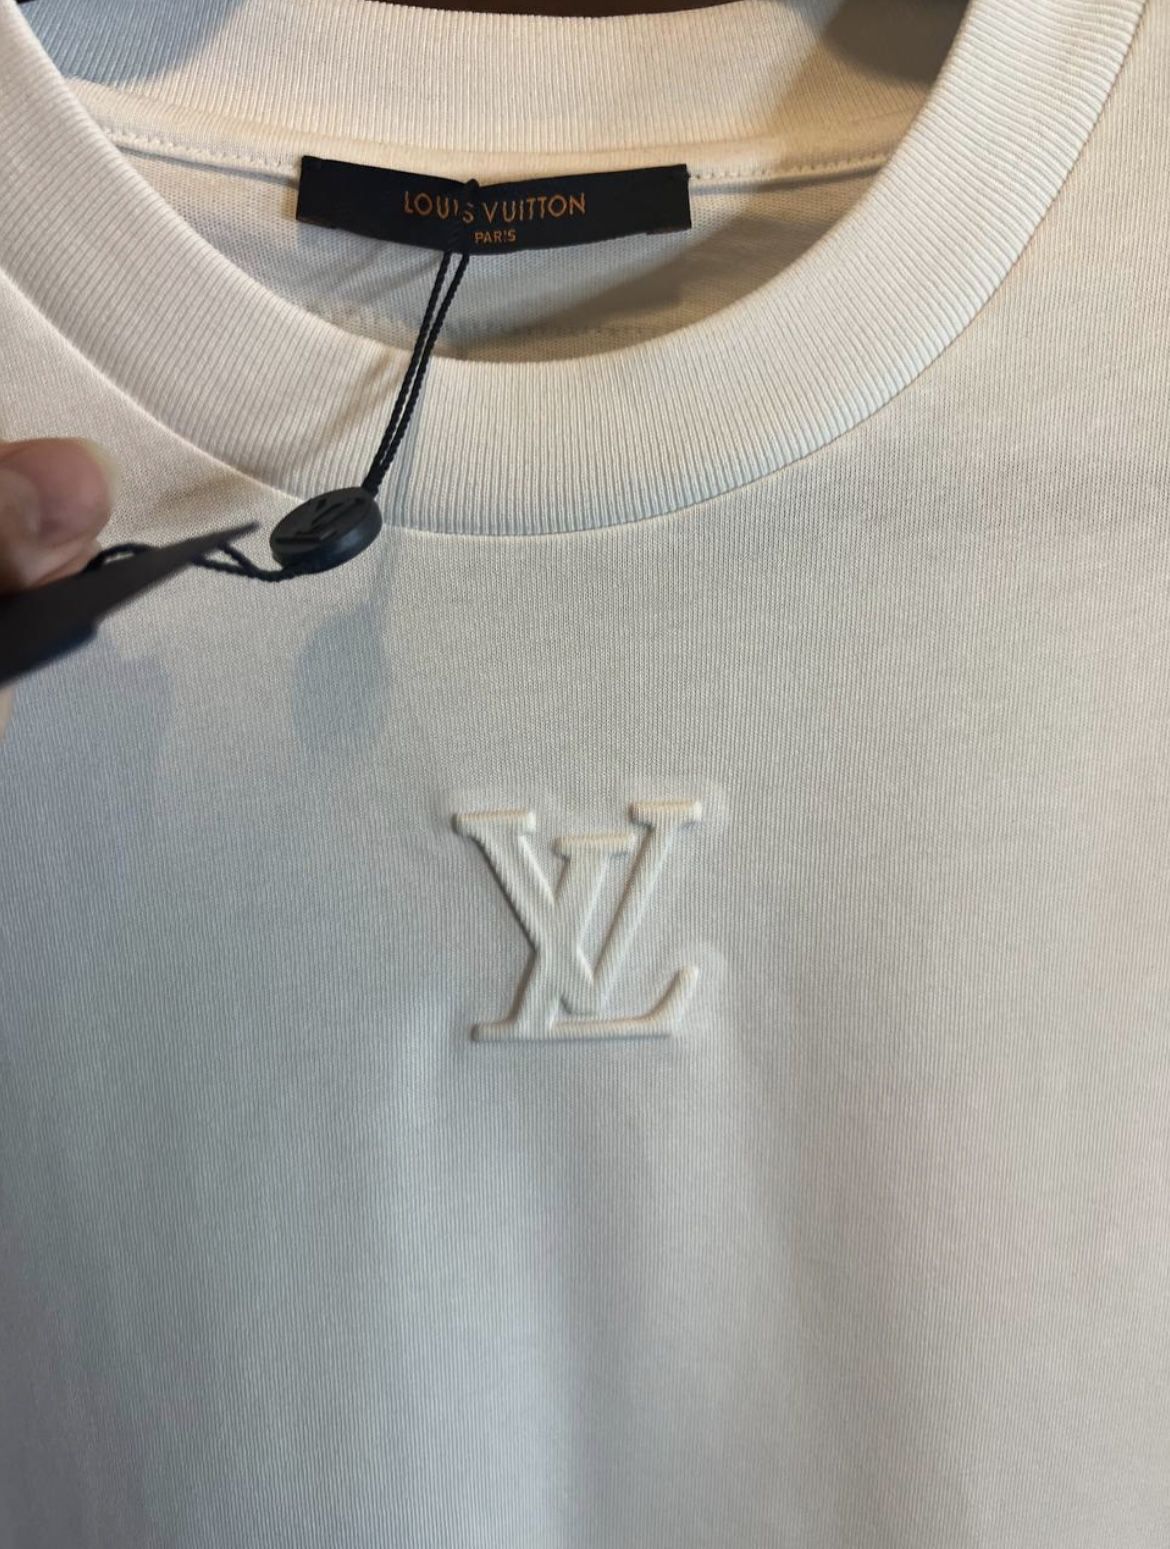 t-shirt Louis Vuitton Jazz tshirt same day t shirt for Sale in Wesley  Chapel, FL - OfferUp